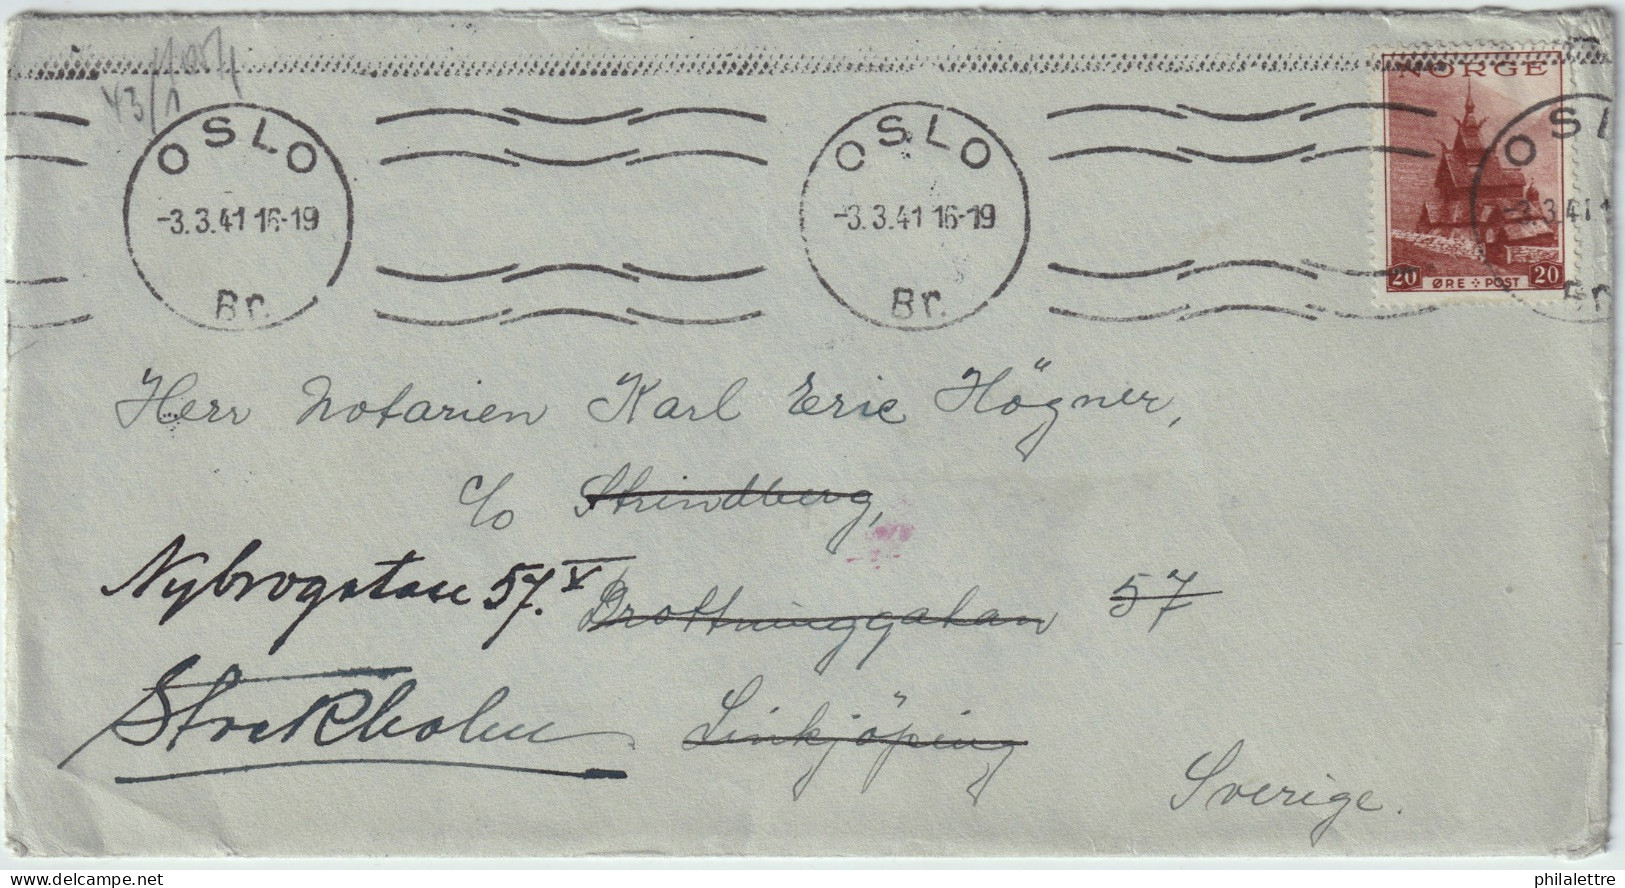 NORWAY To SWEDEN - 1941 - German Censored (Oslo Office) Cover From Oslo To Linkjöping (re-directed) - Franked Facit 245b - Covers & Documents